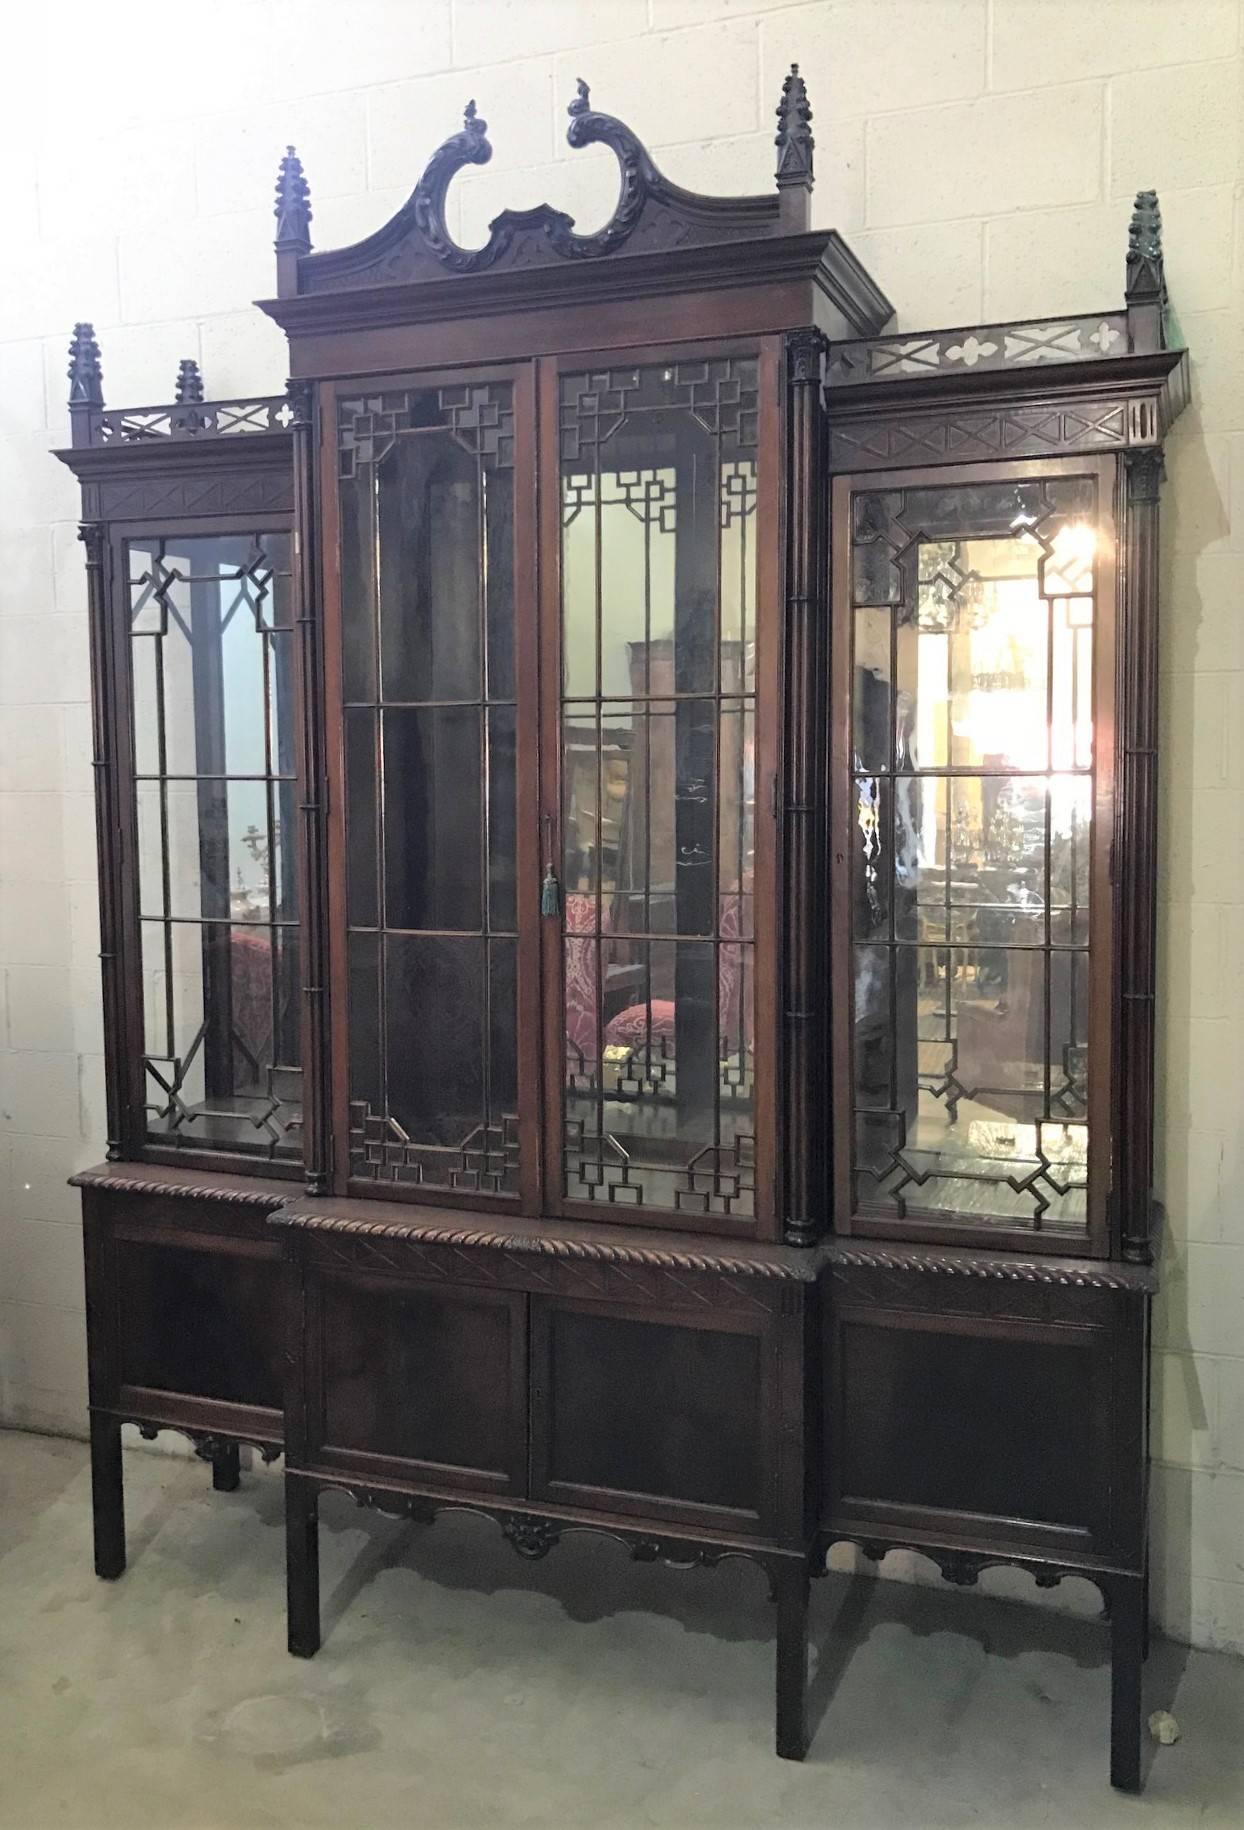 Magnificent 19th century Chinese Chippendale mahogany breakfront bookcase having a superbly carved swan's neck pediment with carved steeple finials, pierced gallery and blind fret frieze. 

The large glazed pane door with intricate astragal